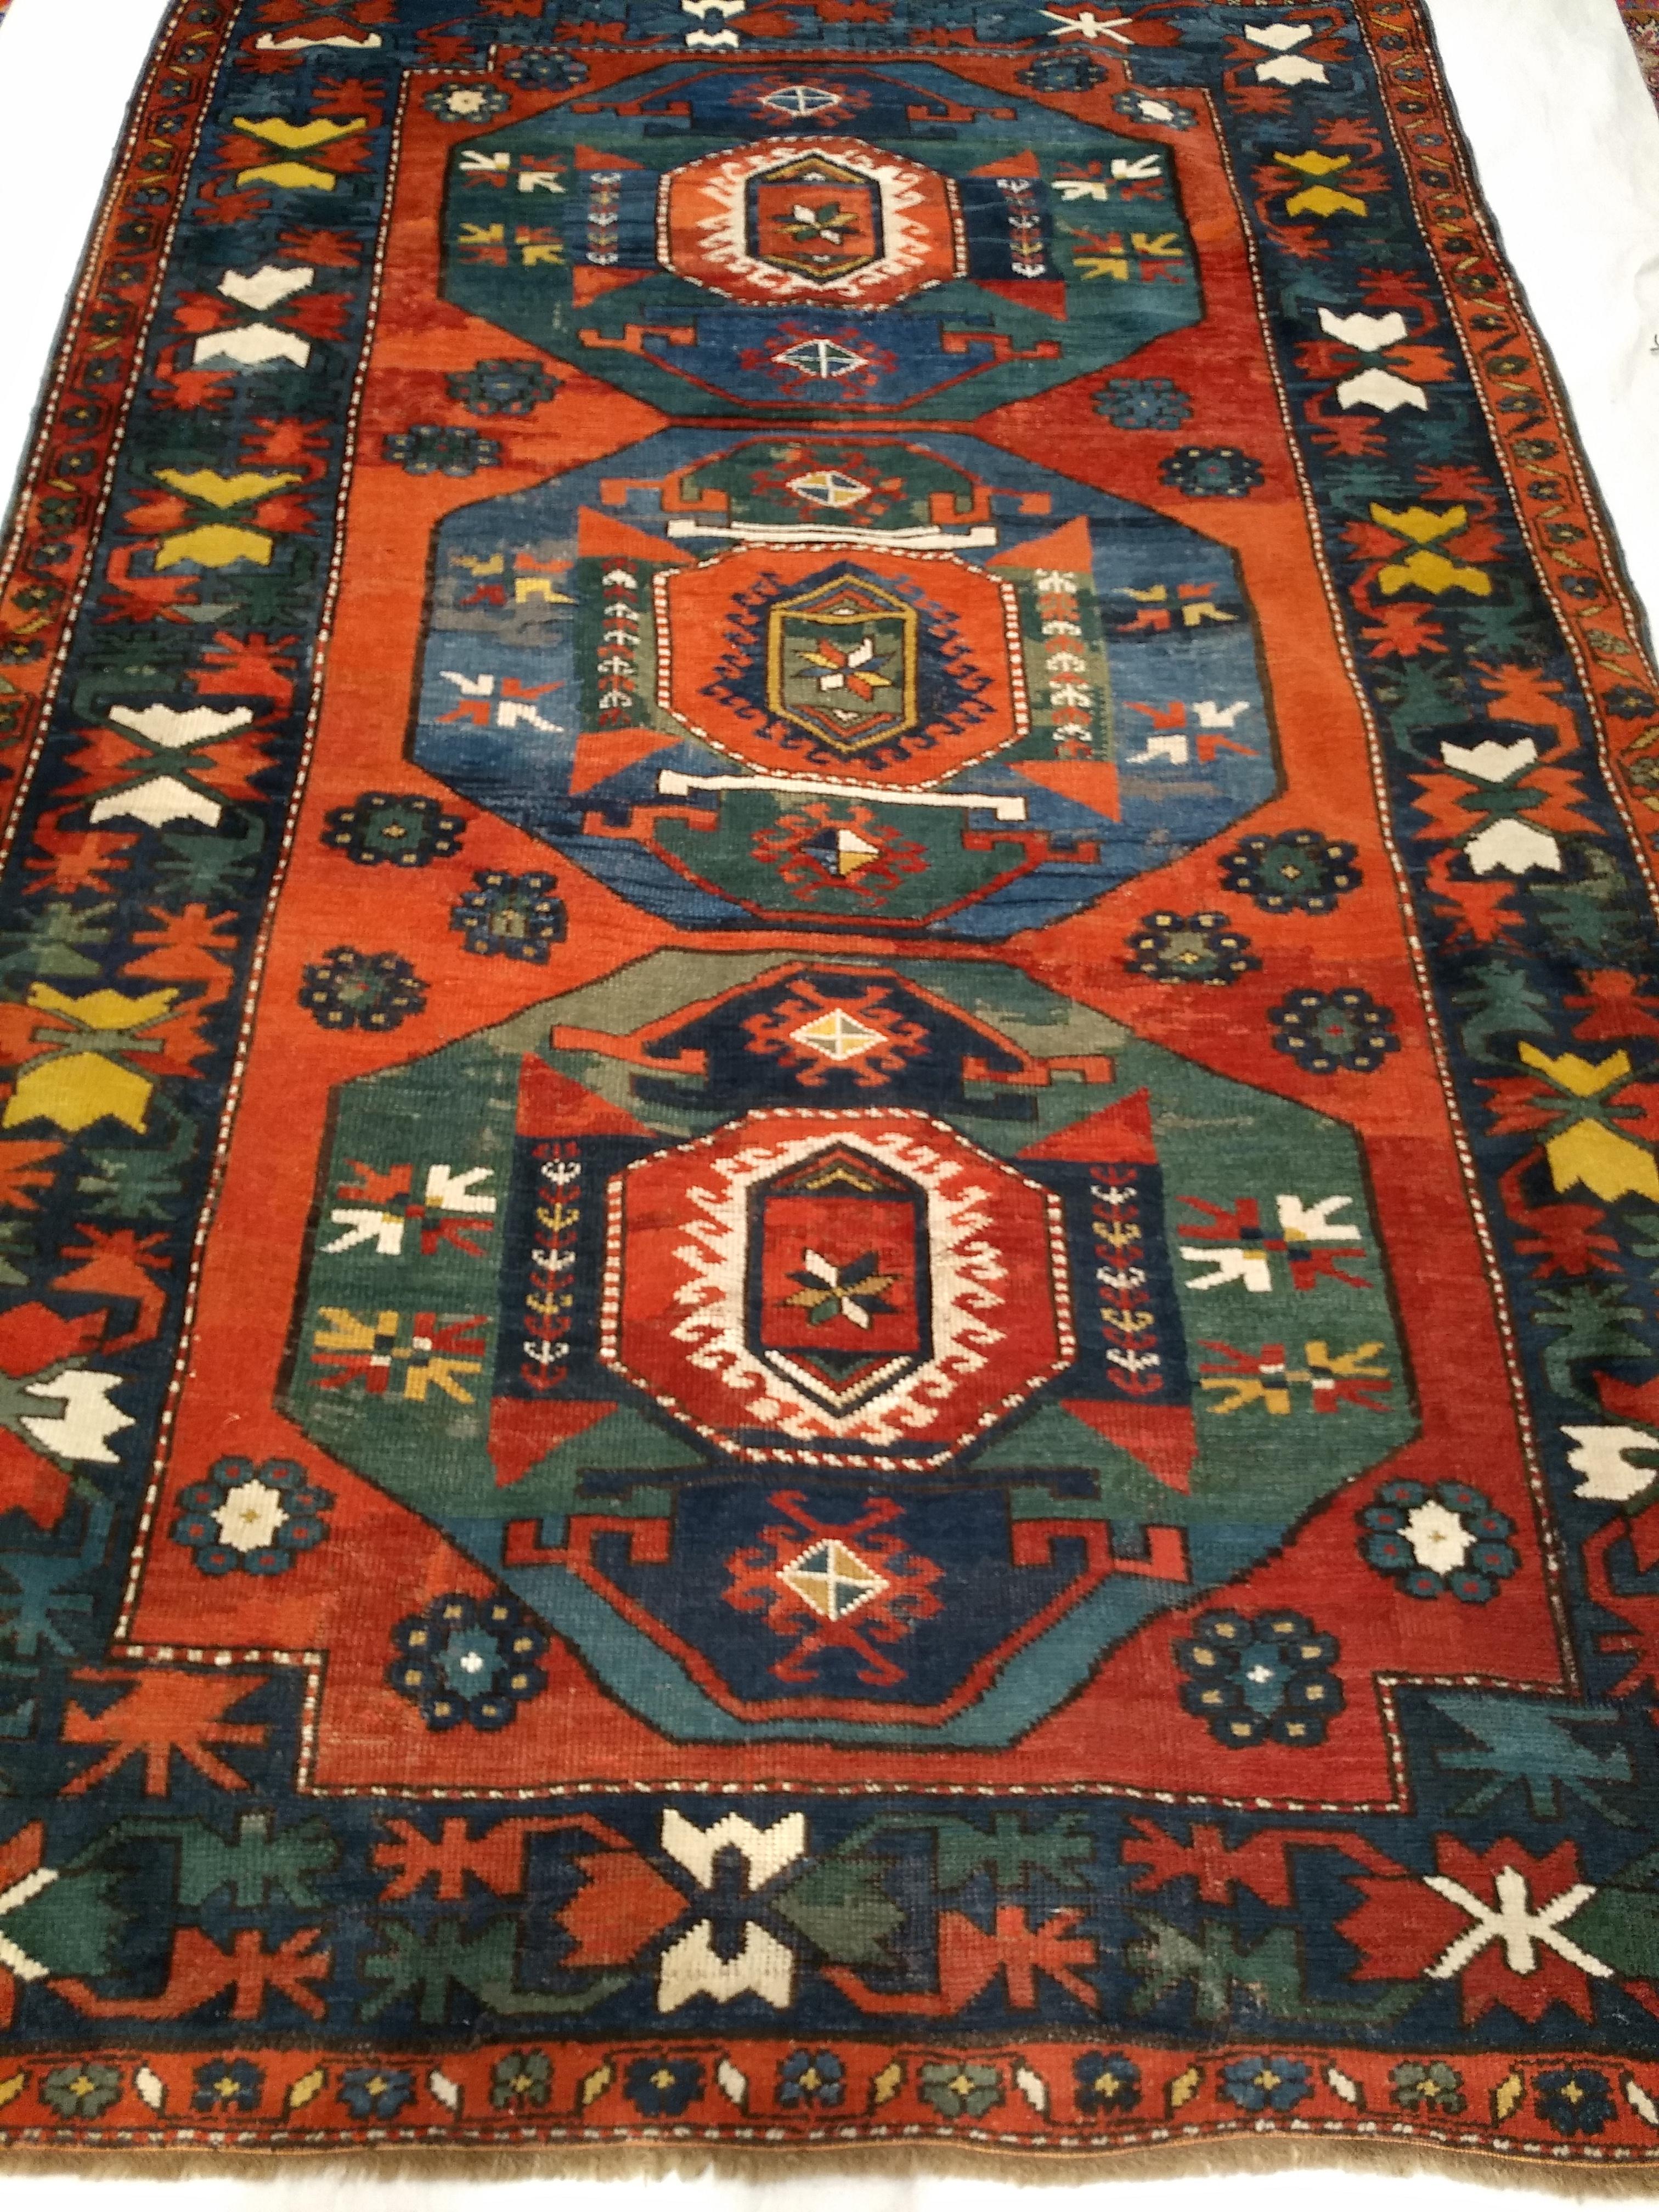 A  beautiful late 19th century Caucasian Kazak with three medallions with wonderful abrash green and blue colors throughout the design set in an antique red background.  The border has large design forms in red, yellow, green, ivory colors set in a